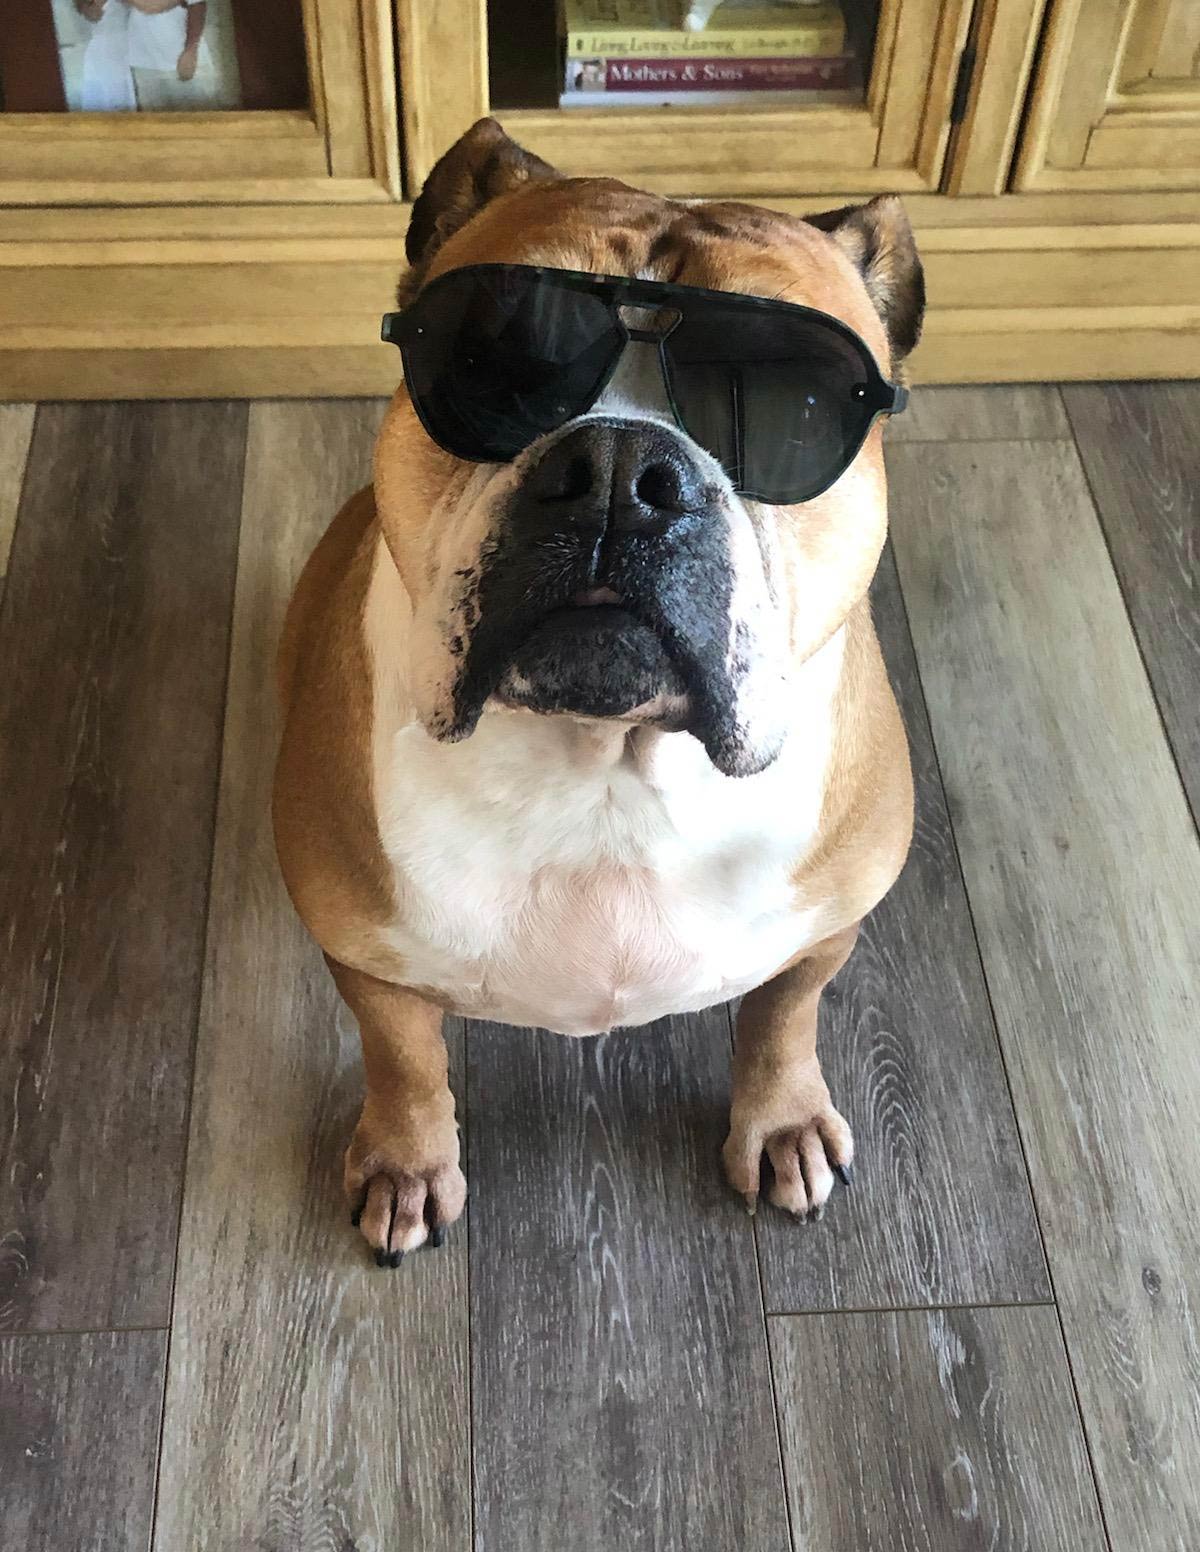 My dog is so much cooler than me